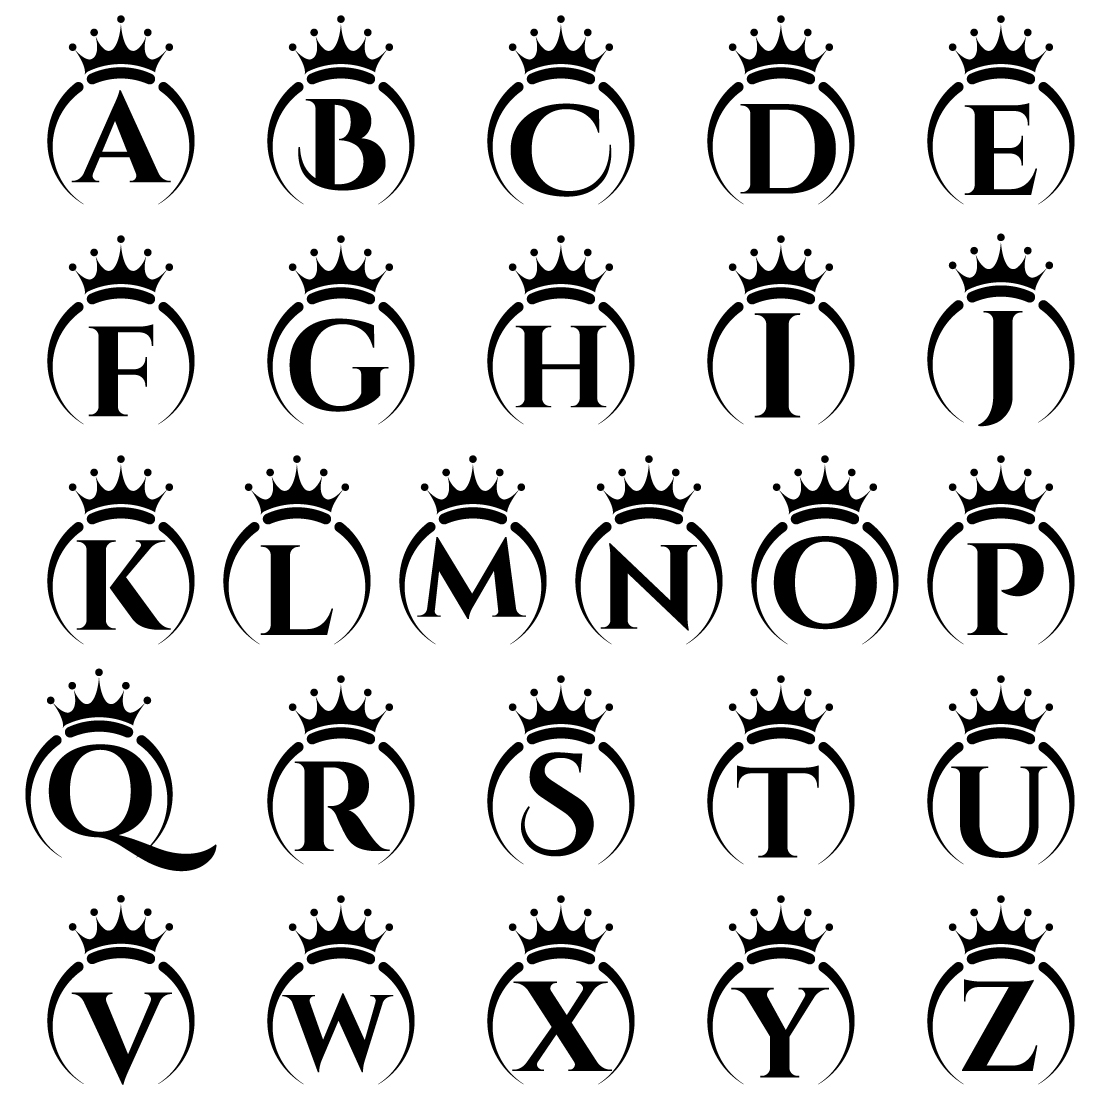 Initial A-Z monogram alphabet with a crown Royal, King, queen luxury symbol Font emblem preview image.